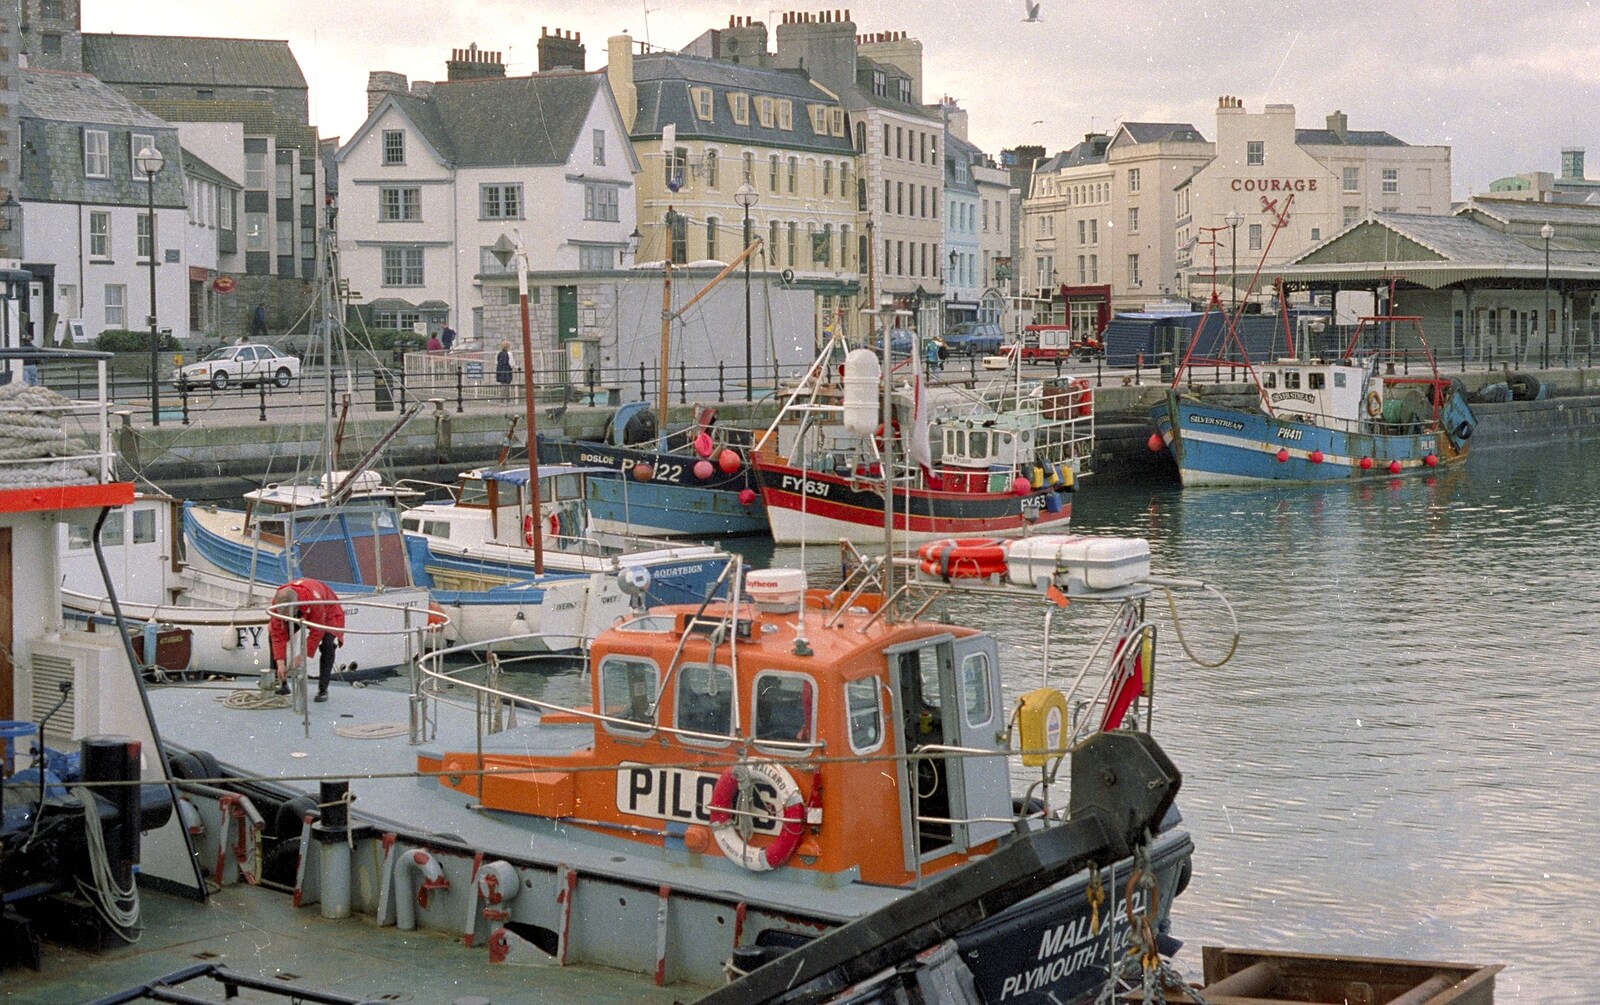 More fishing boats on Sutton Harbour from Uni: A CISU Trip To Plymouth, Devon - 16th March 1996